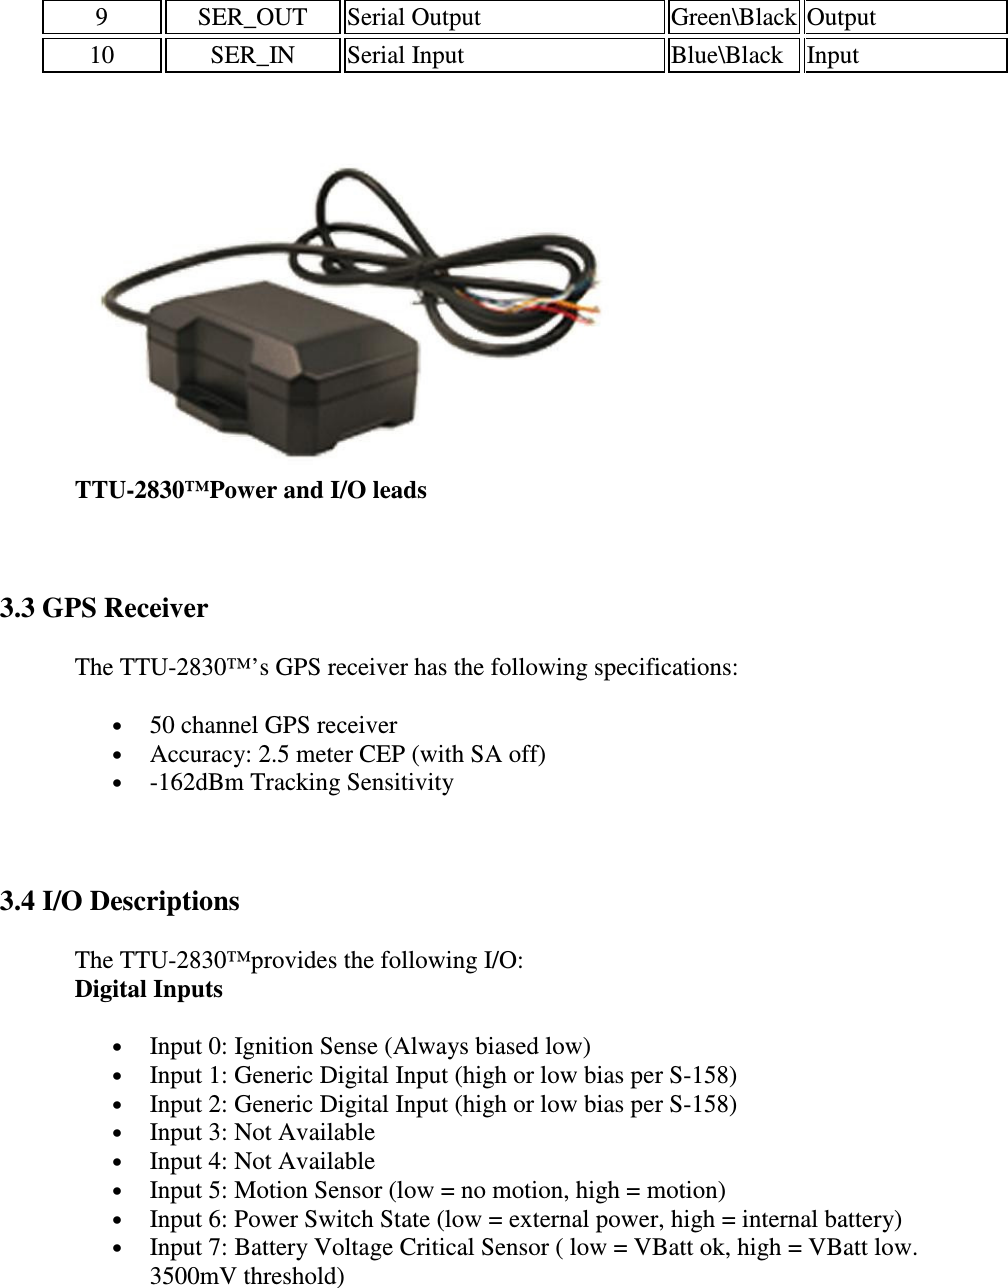 9   SER_OUT   Serial Output   Green\Black Output  10   SER_IN   Serial Input   Blue\Black  Input    TTU-2830™Power and I/O leads  3.3 GPS Receiver The TTU-2830™’s GPS receiver has the following specifications:  • 50 channel GPS receiver  • Accuracy: 2.5 meter CEP (with SA off)  • -162dBm Tracking Sensitivity   3.4 I/O Descriptions The TTU-2830™provides the following I/O:  Digital Inputs • Input 0: Ignition Sense (Always biased low)  • Input 1: Generic Digital Input (high or low bias per S-158)  • Input 2: Generic Digital Input (high or low bias per S-158)  • Input 3: Not Available  • Input 4: Not Available  • Input 5: Motion Sensor (low = no motion, high = motion)  • Input 6: Power Switch State (low = external power, high = internal battery)  • Input 7: Battery Voltage Critical Sensor ( low = VBatt ok, high = VBatt low. 3500mV threshold)  